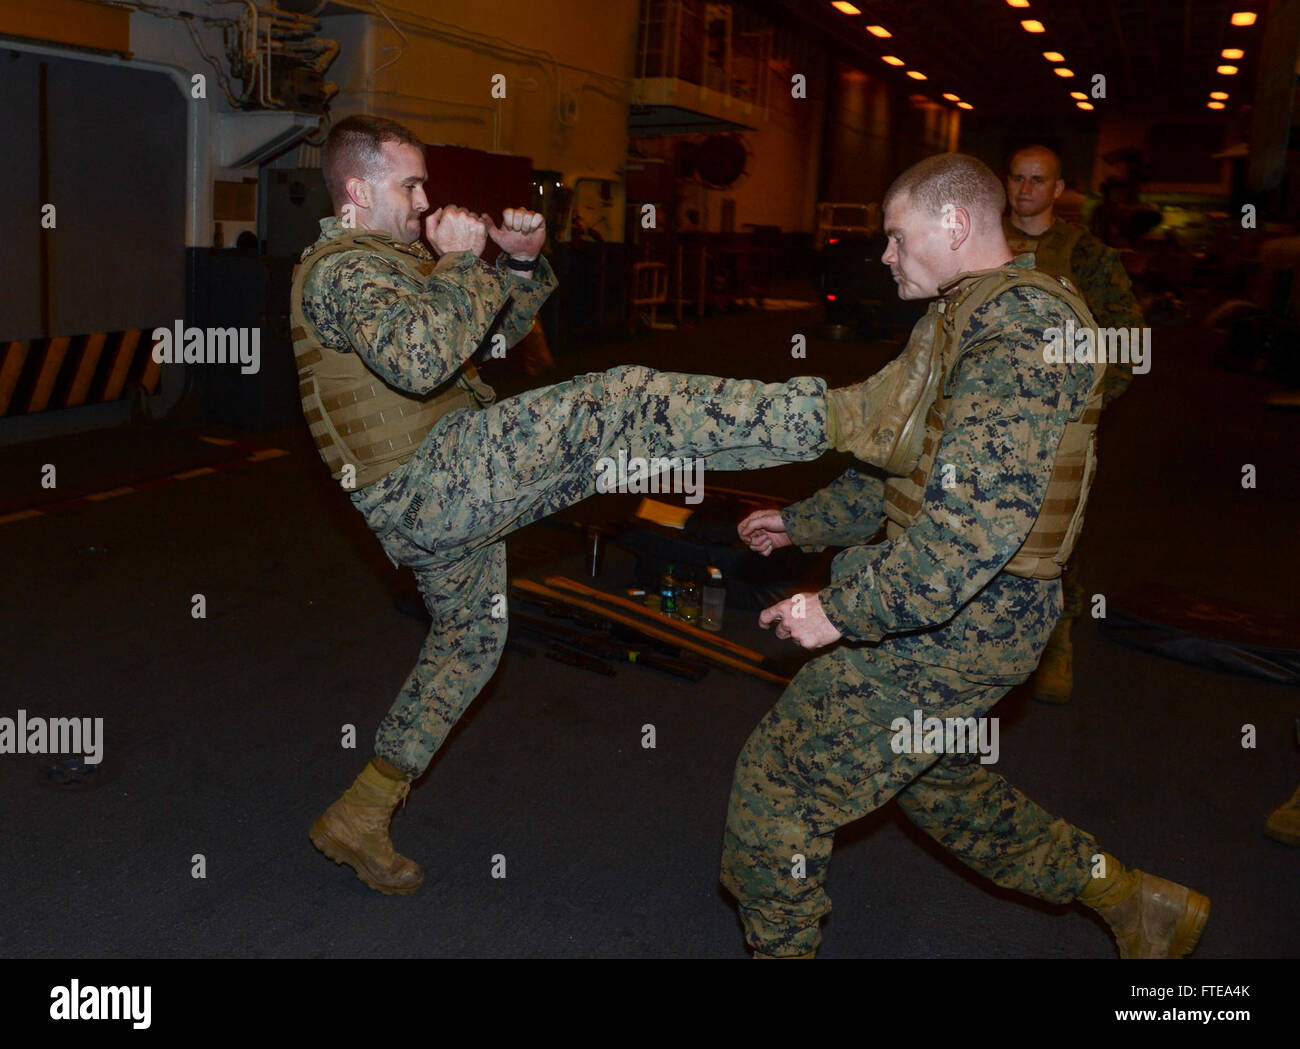 140219-N-MW280-485 ATLANTIC OCEAN (Feb. 19, 2014) --  Gunnery Sgt. Nathan Loesche, from Cincinnati, Ohio, practices Marine Corps Martial Arts Program techniques in the hangar bay aboard the multipurpose amphibious assault ship USS Bataan (LHD 5).  The Bataan Amphibious Readiness Group is deployed supporting maritime security operations, providing crisis response capability, increasing theater security cooperation and a forward naval presence in the U.S. Navy's 5th and 6th Fleet Area of Responsibility. (U.S. Navy Photo by Mass Communication Specialist 3rd Class Chase Hawley/Released) Stock Photo